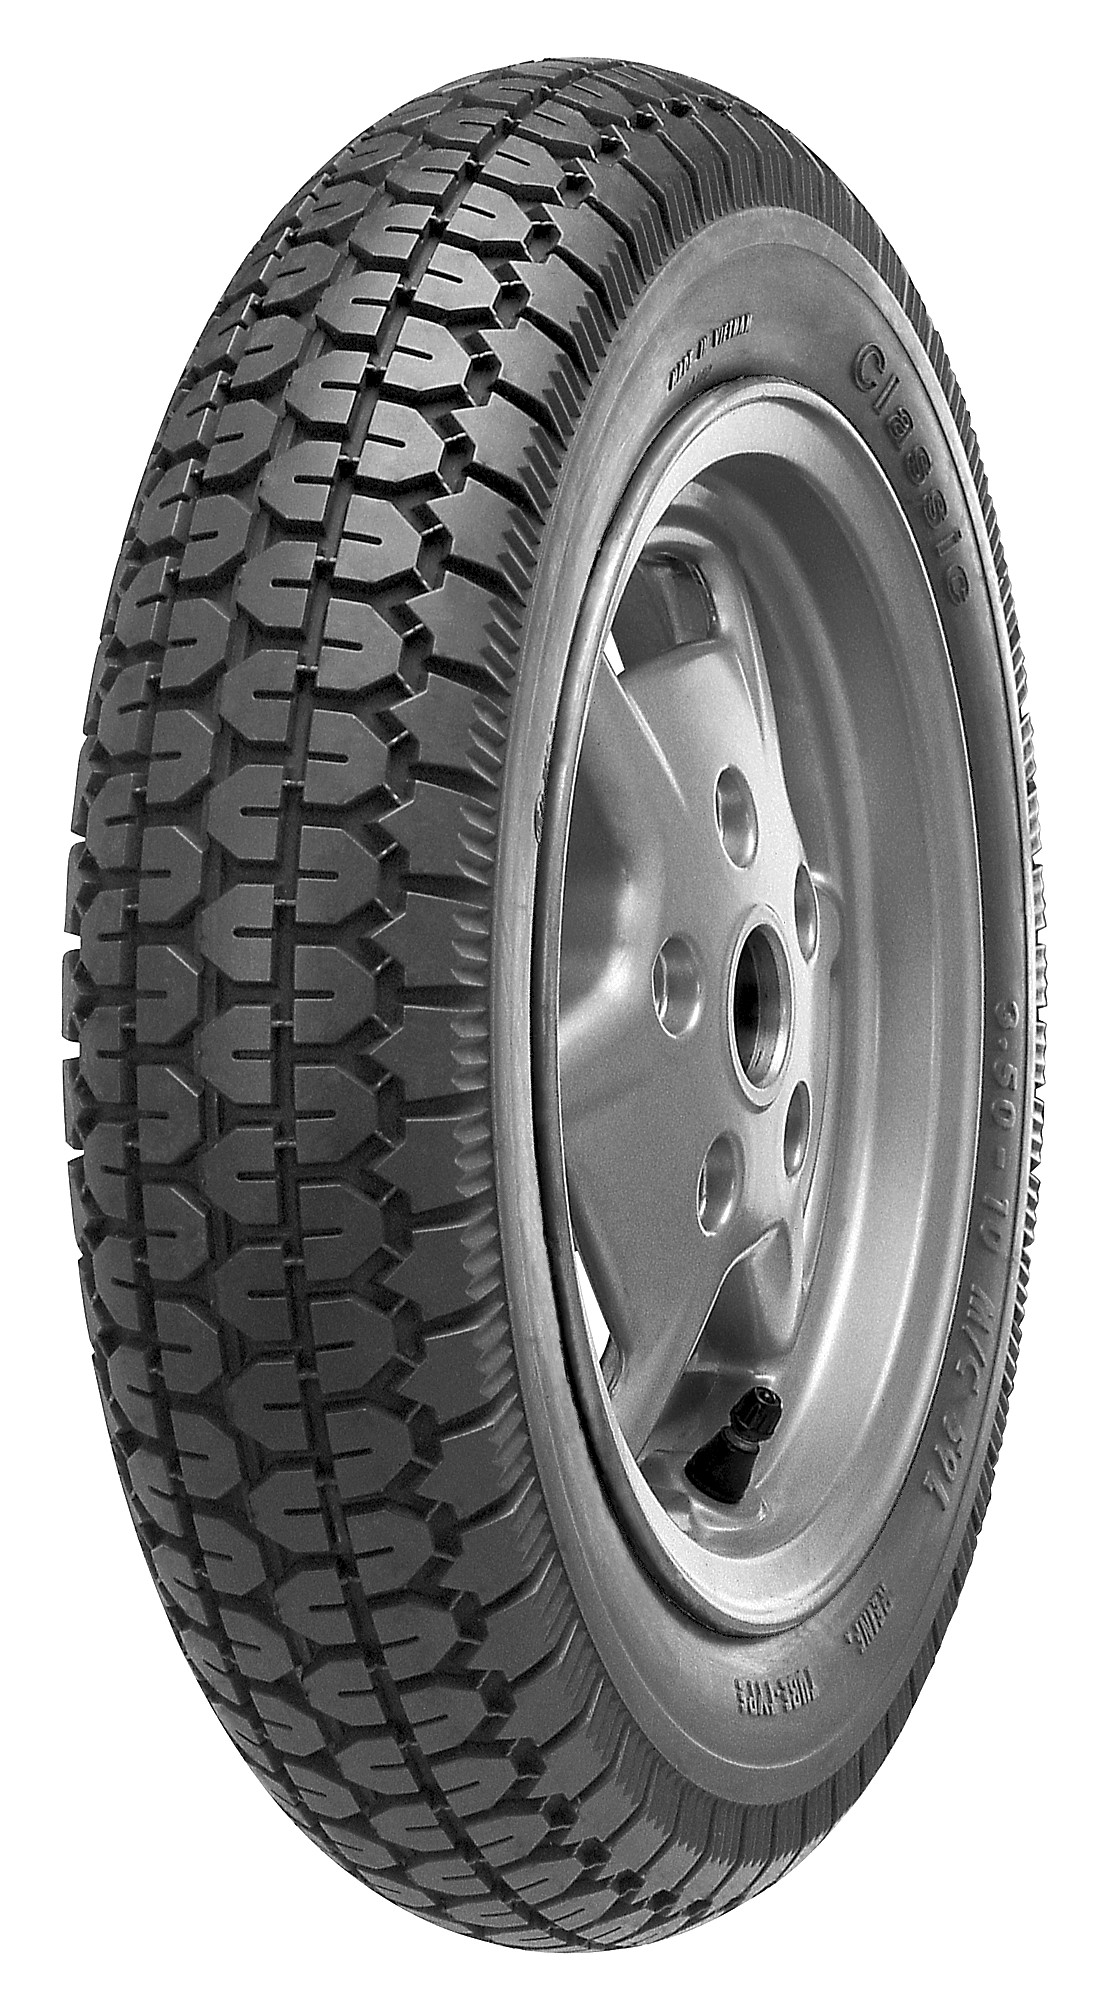 product_type-moto_tires CONTINENTAL CLASSIC 3.50 R10 59L